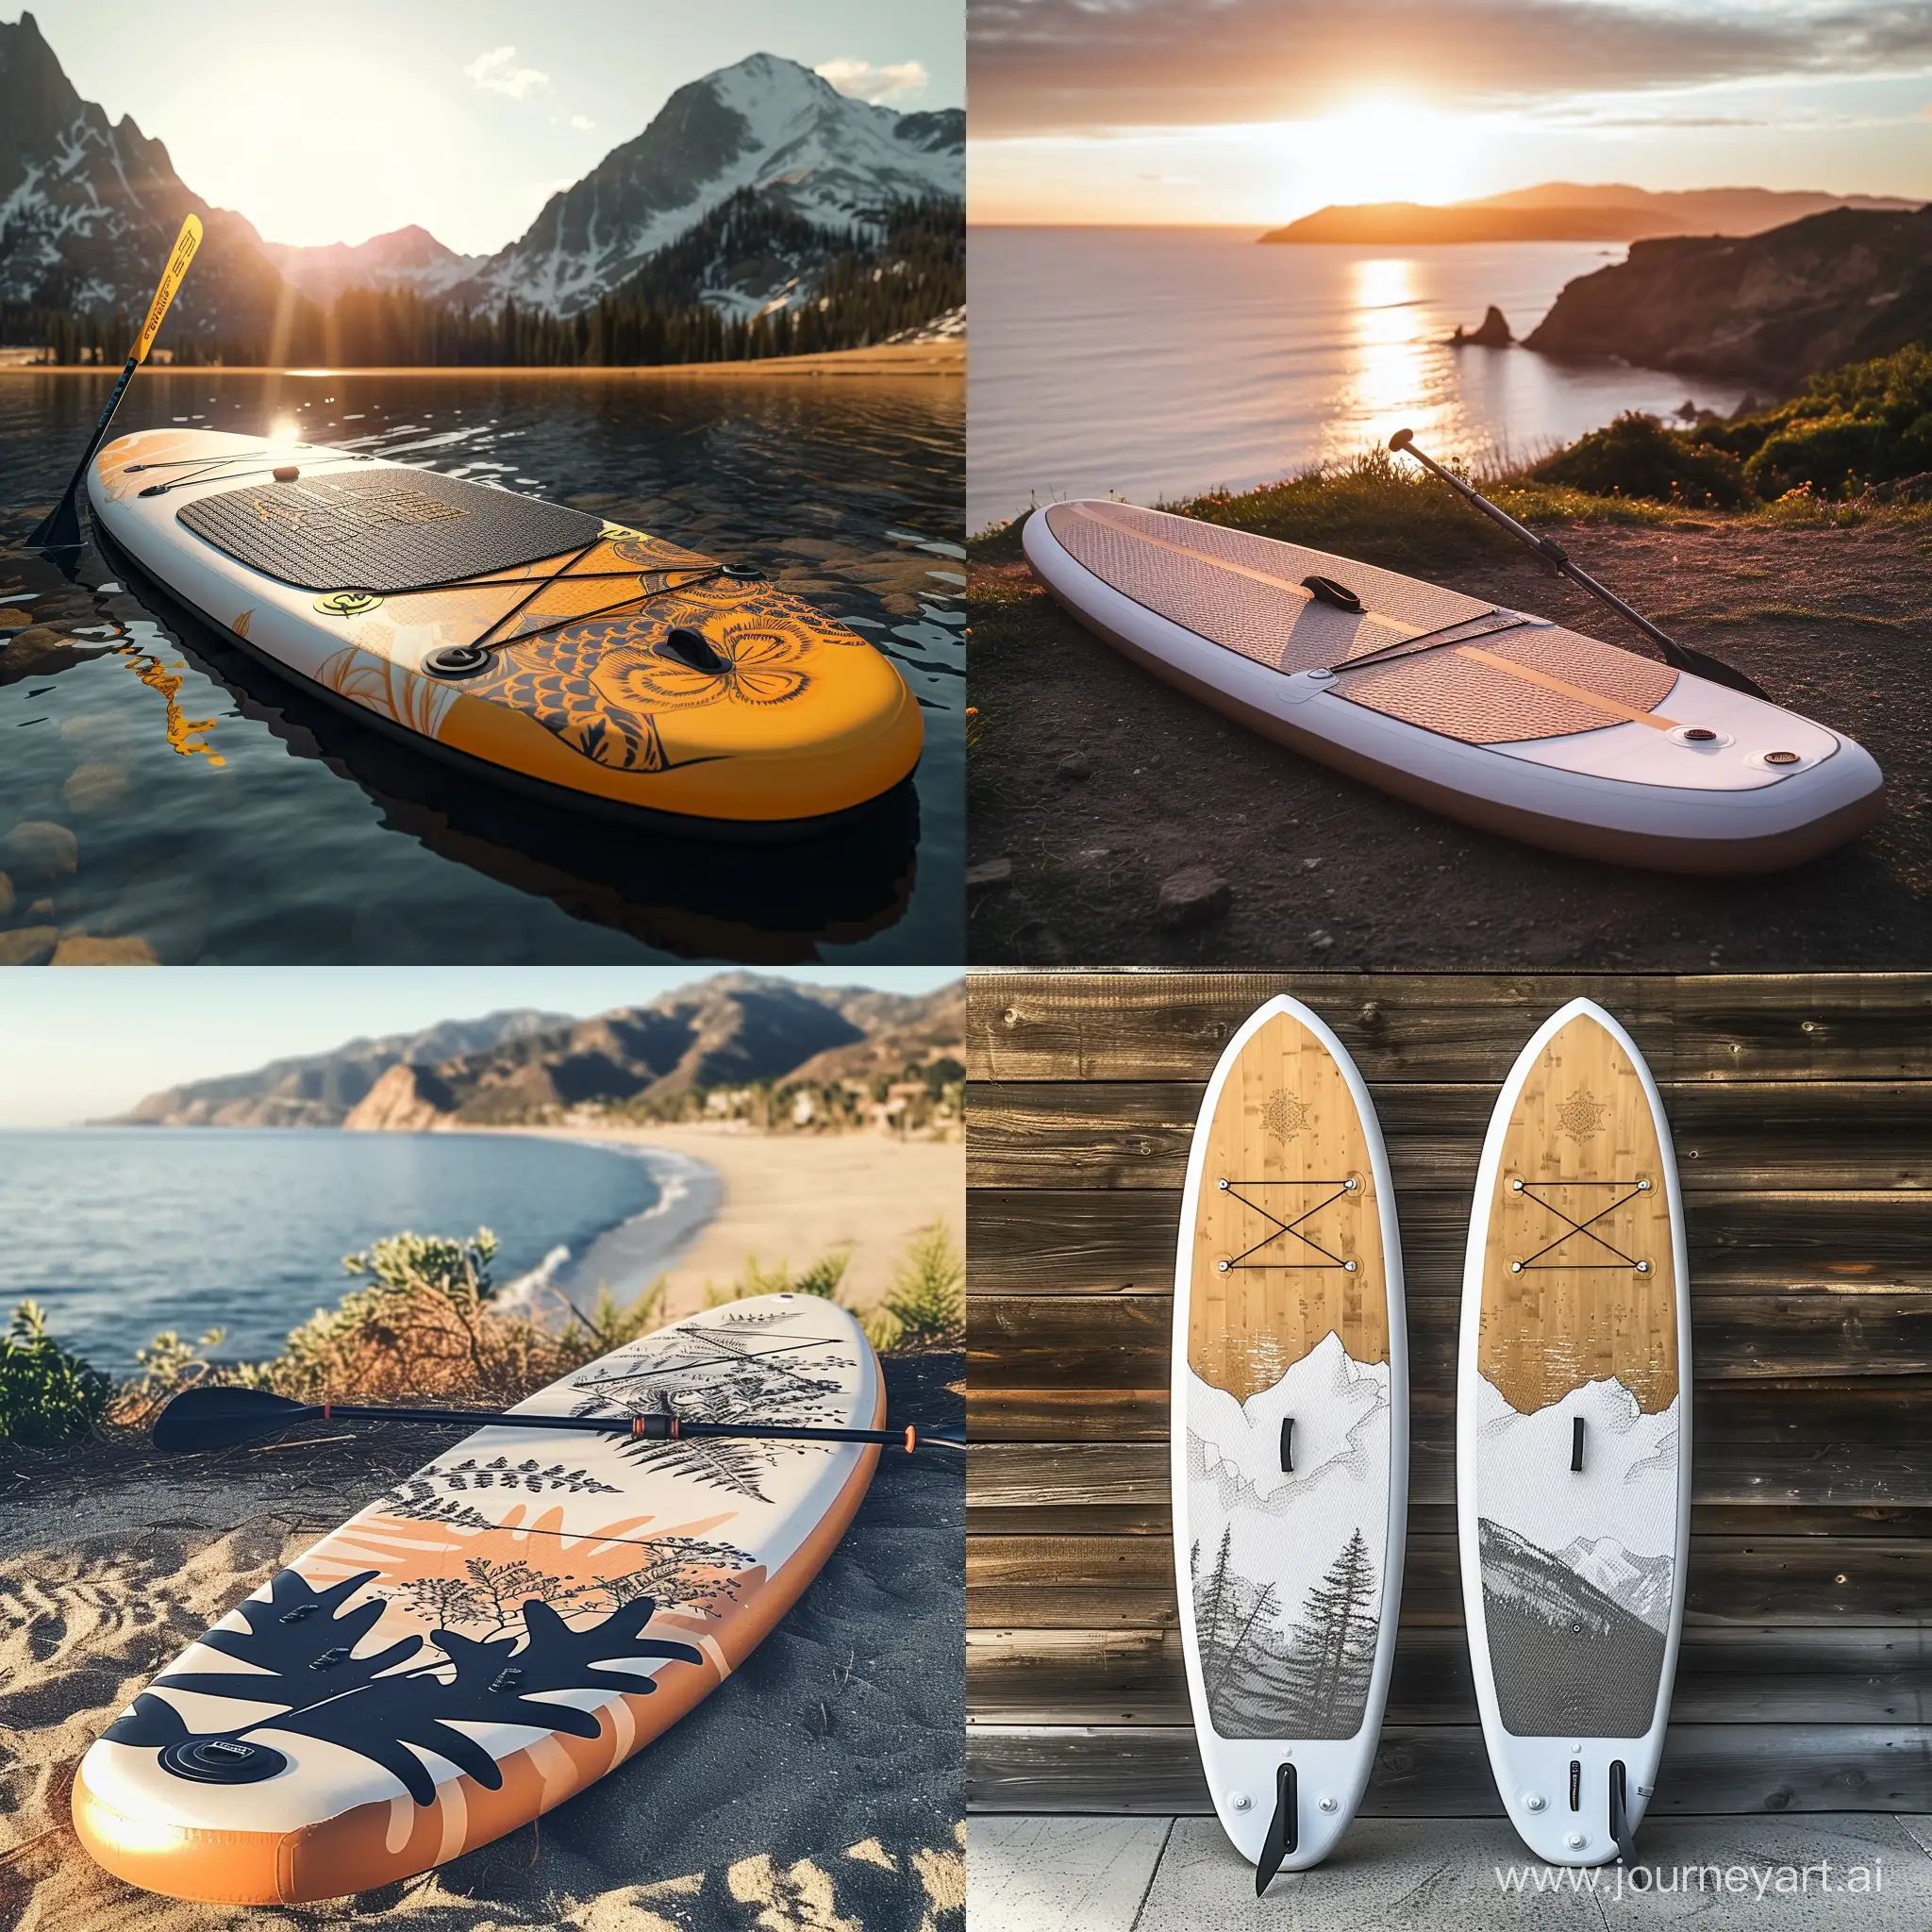 Versatile-SUP-Board-Creation-for-Summer-Adventures-Beaches-Mountains-Hiking-and-Sunsoaked-Escapes